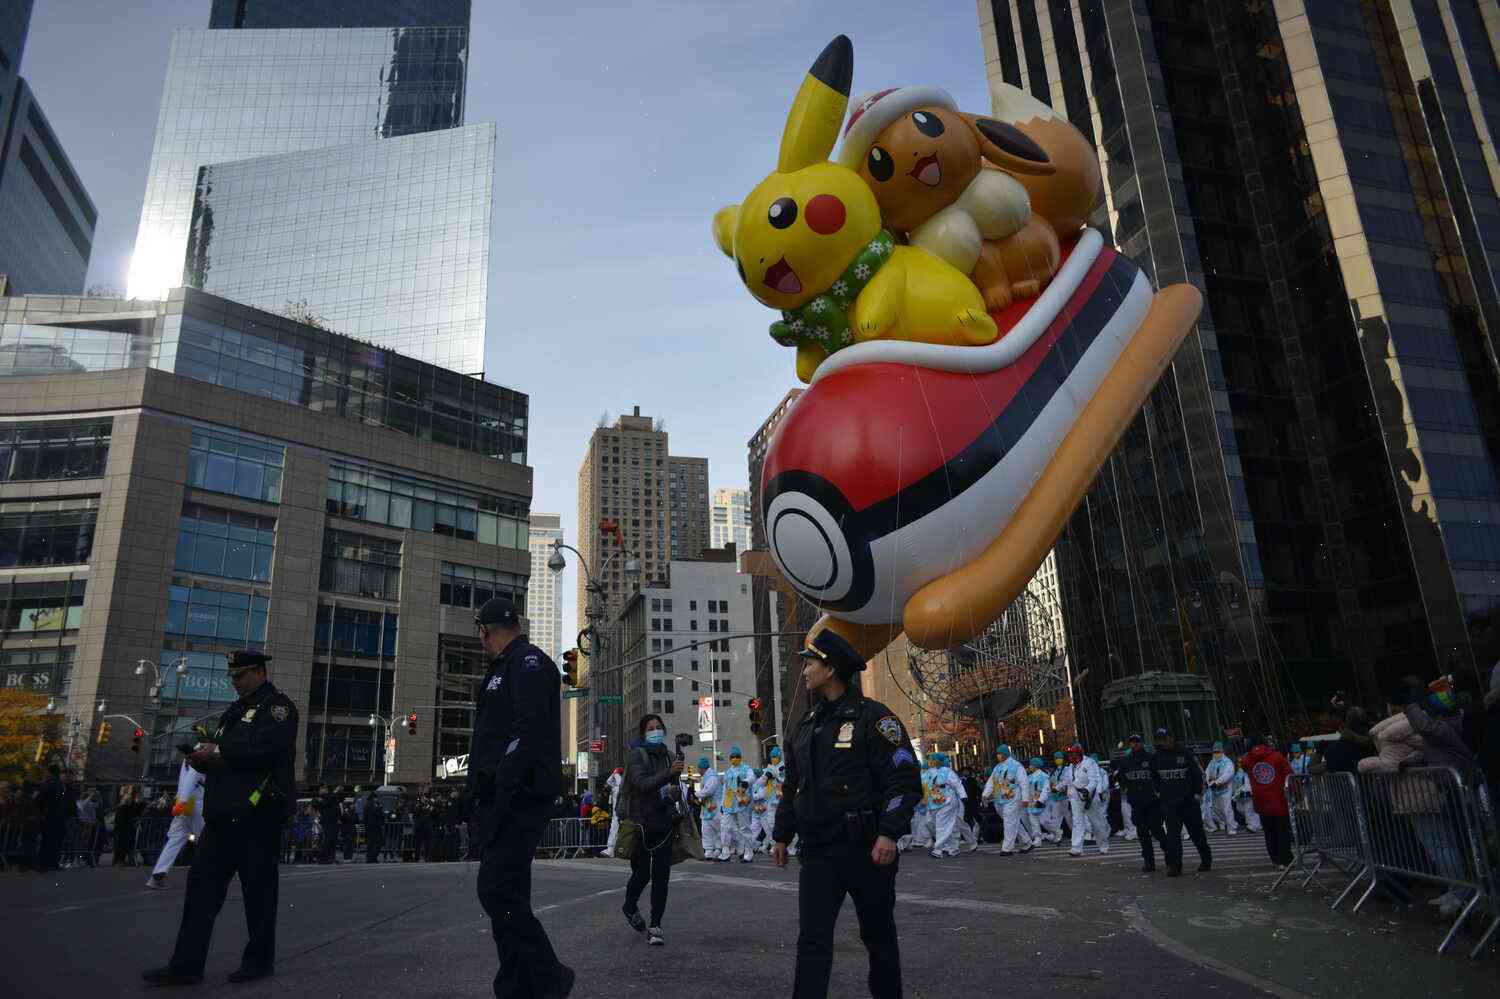 How Pikachu’s appearance in the Macy’s Thanksgiving Day Parade illustrates the animator’s obsession with the character